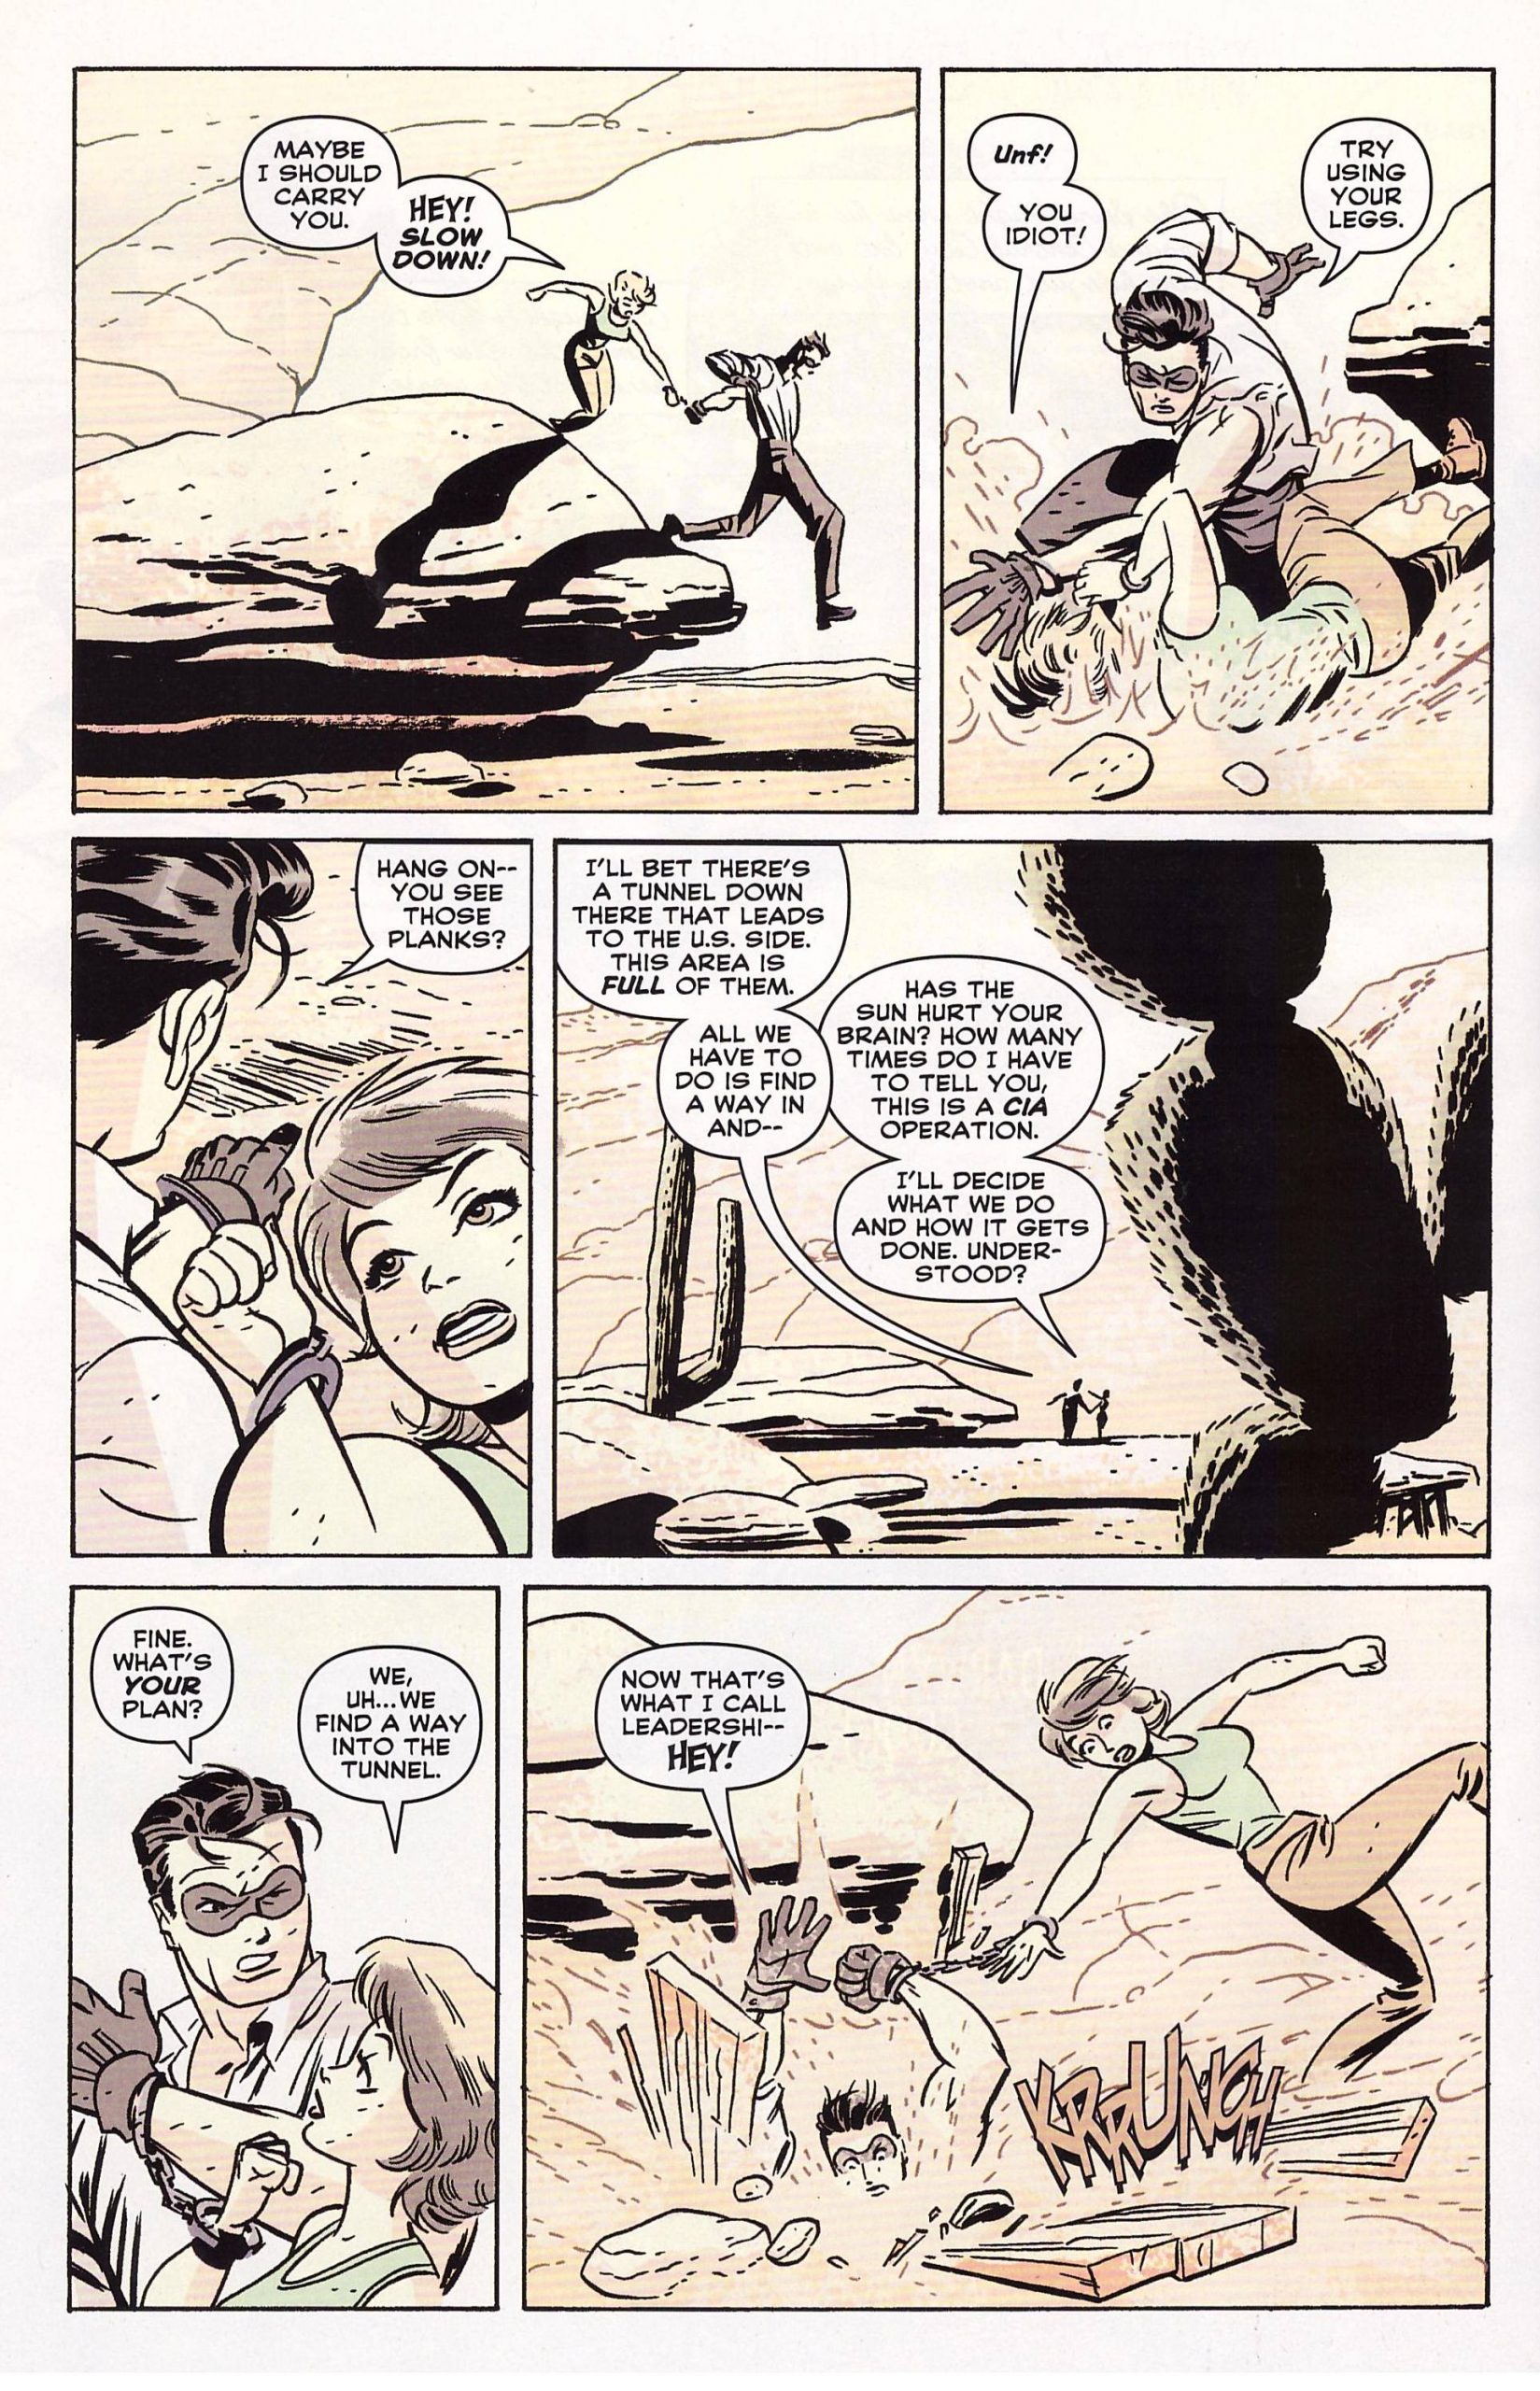 The Spirit by Darwyn Cooke review